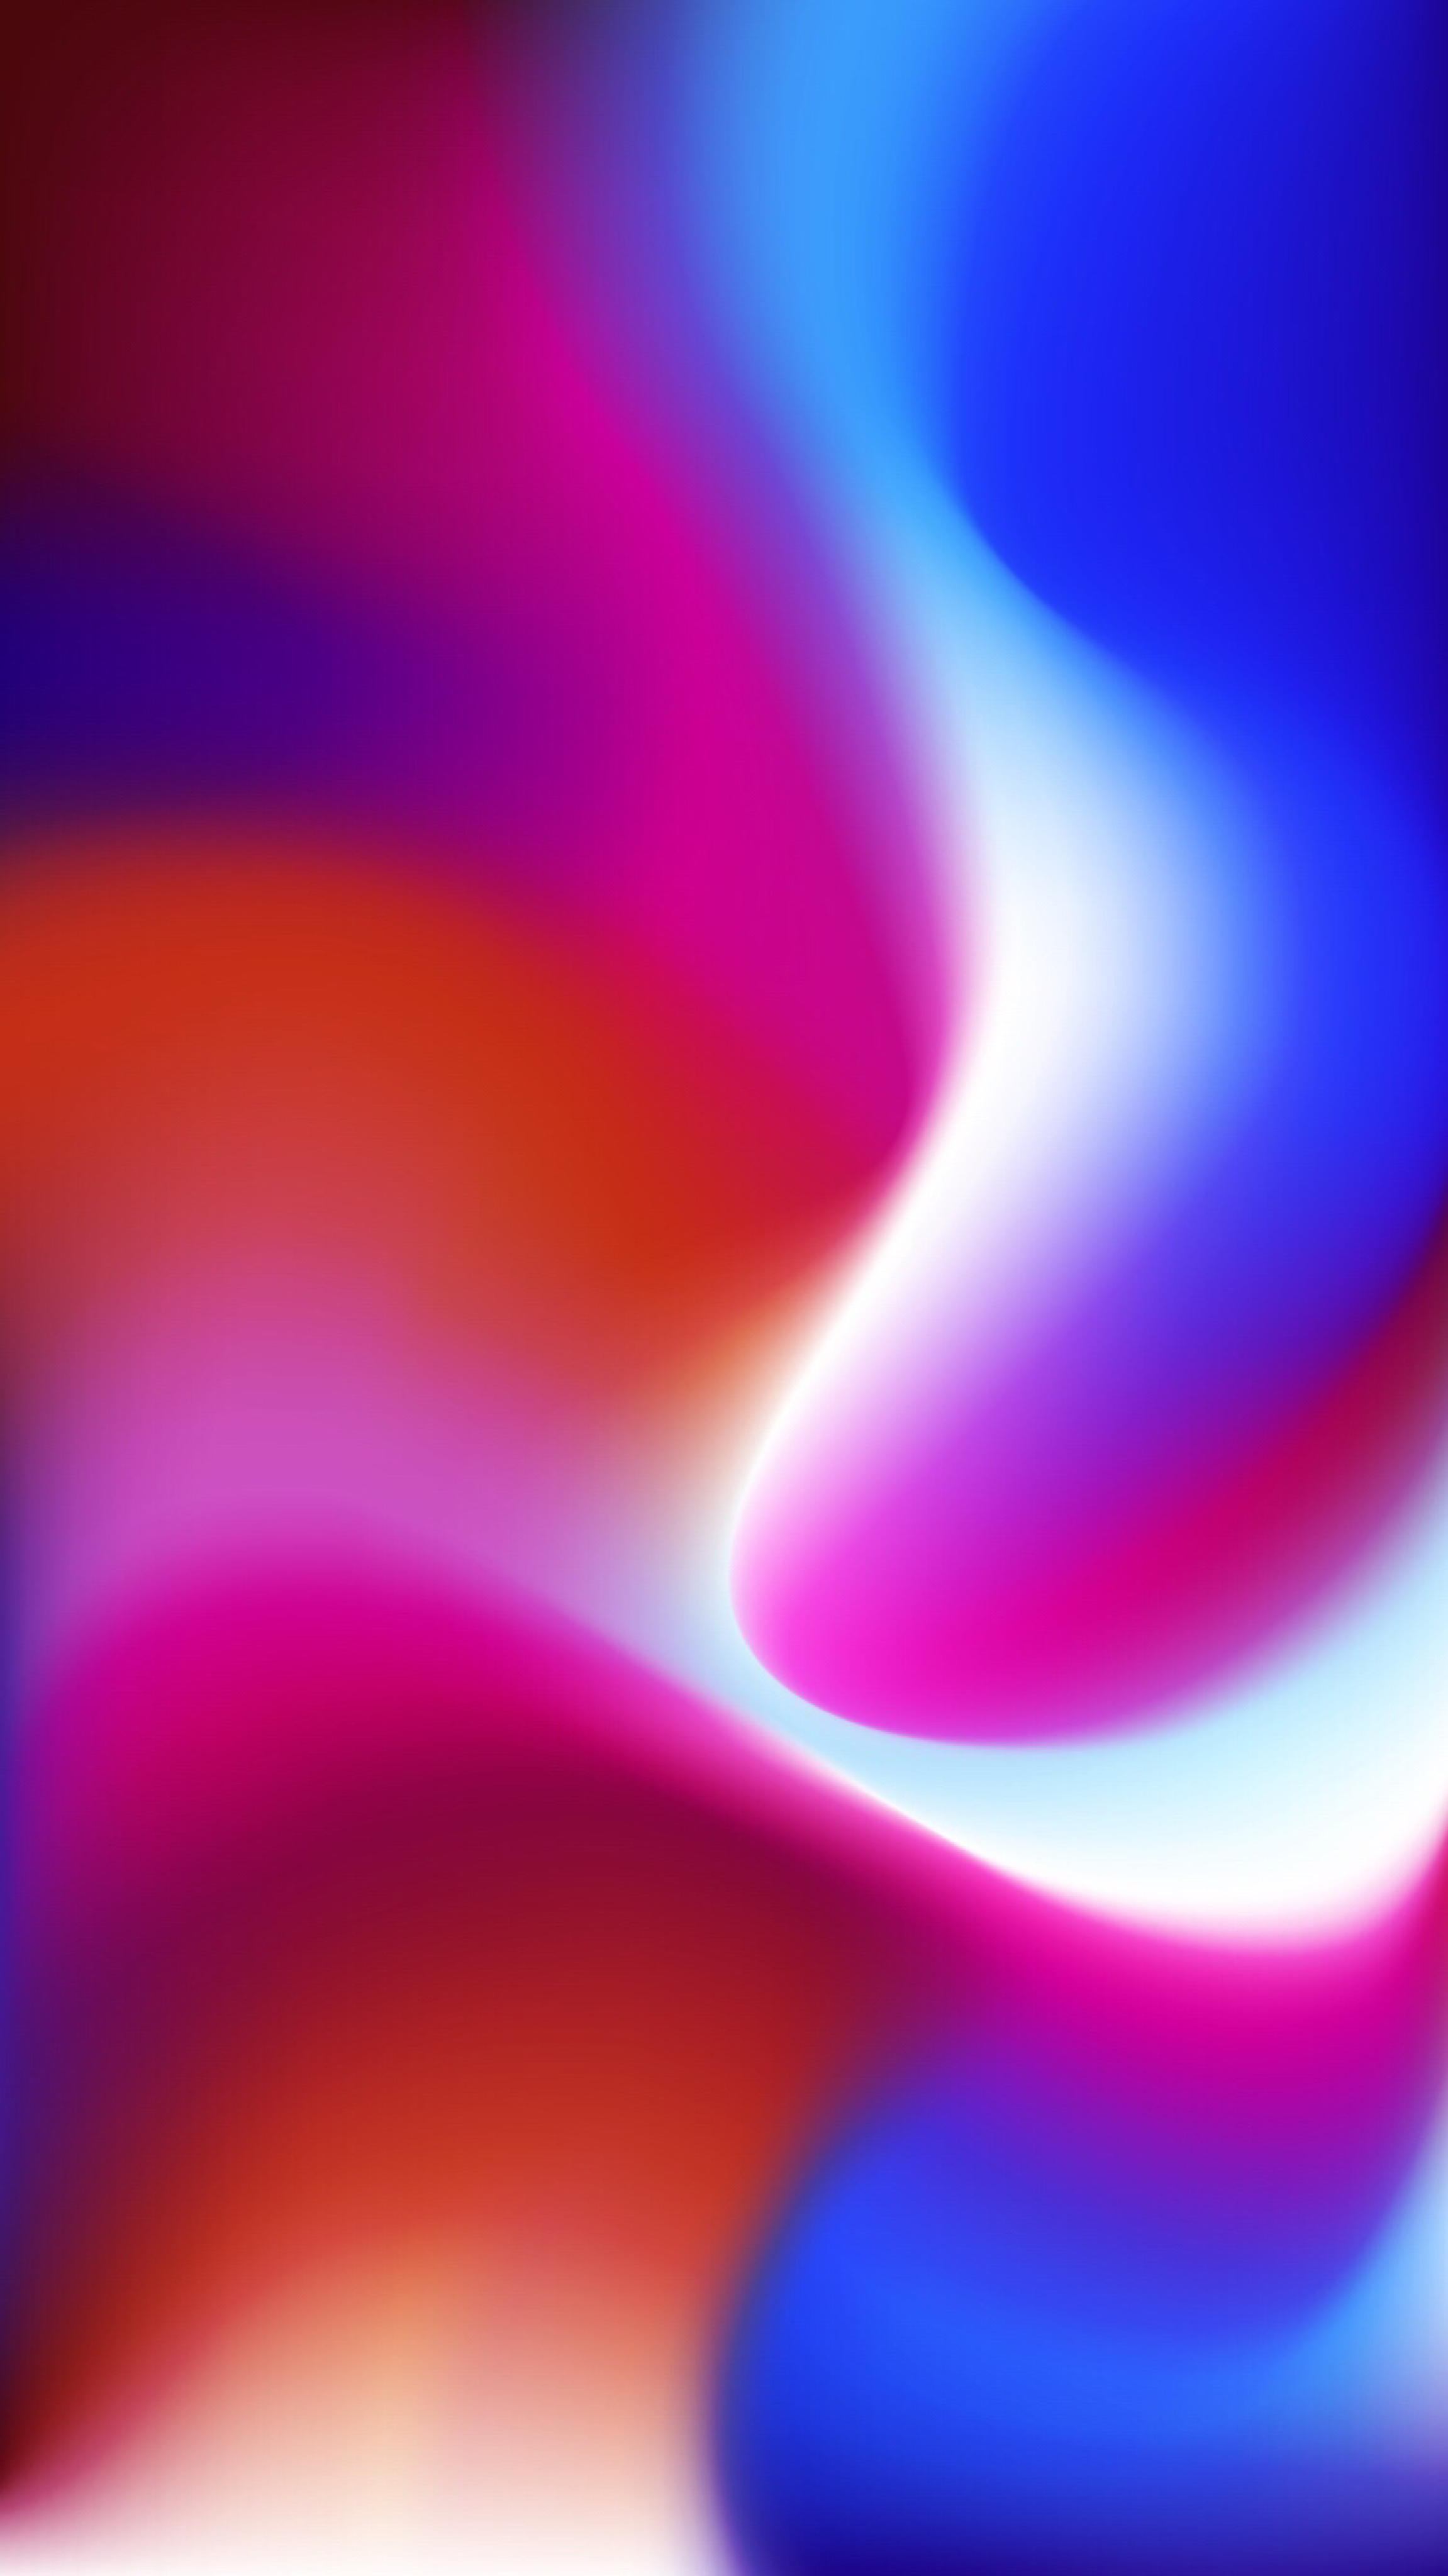 Swirly Red And Blue Background - HD Wallpaper 